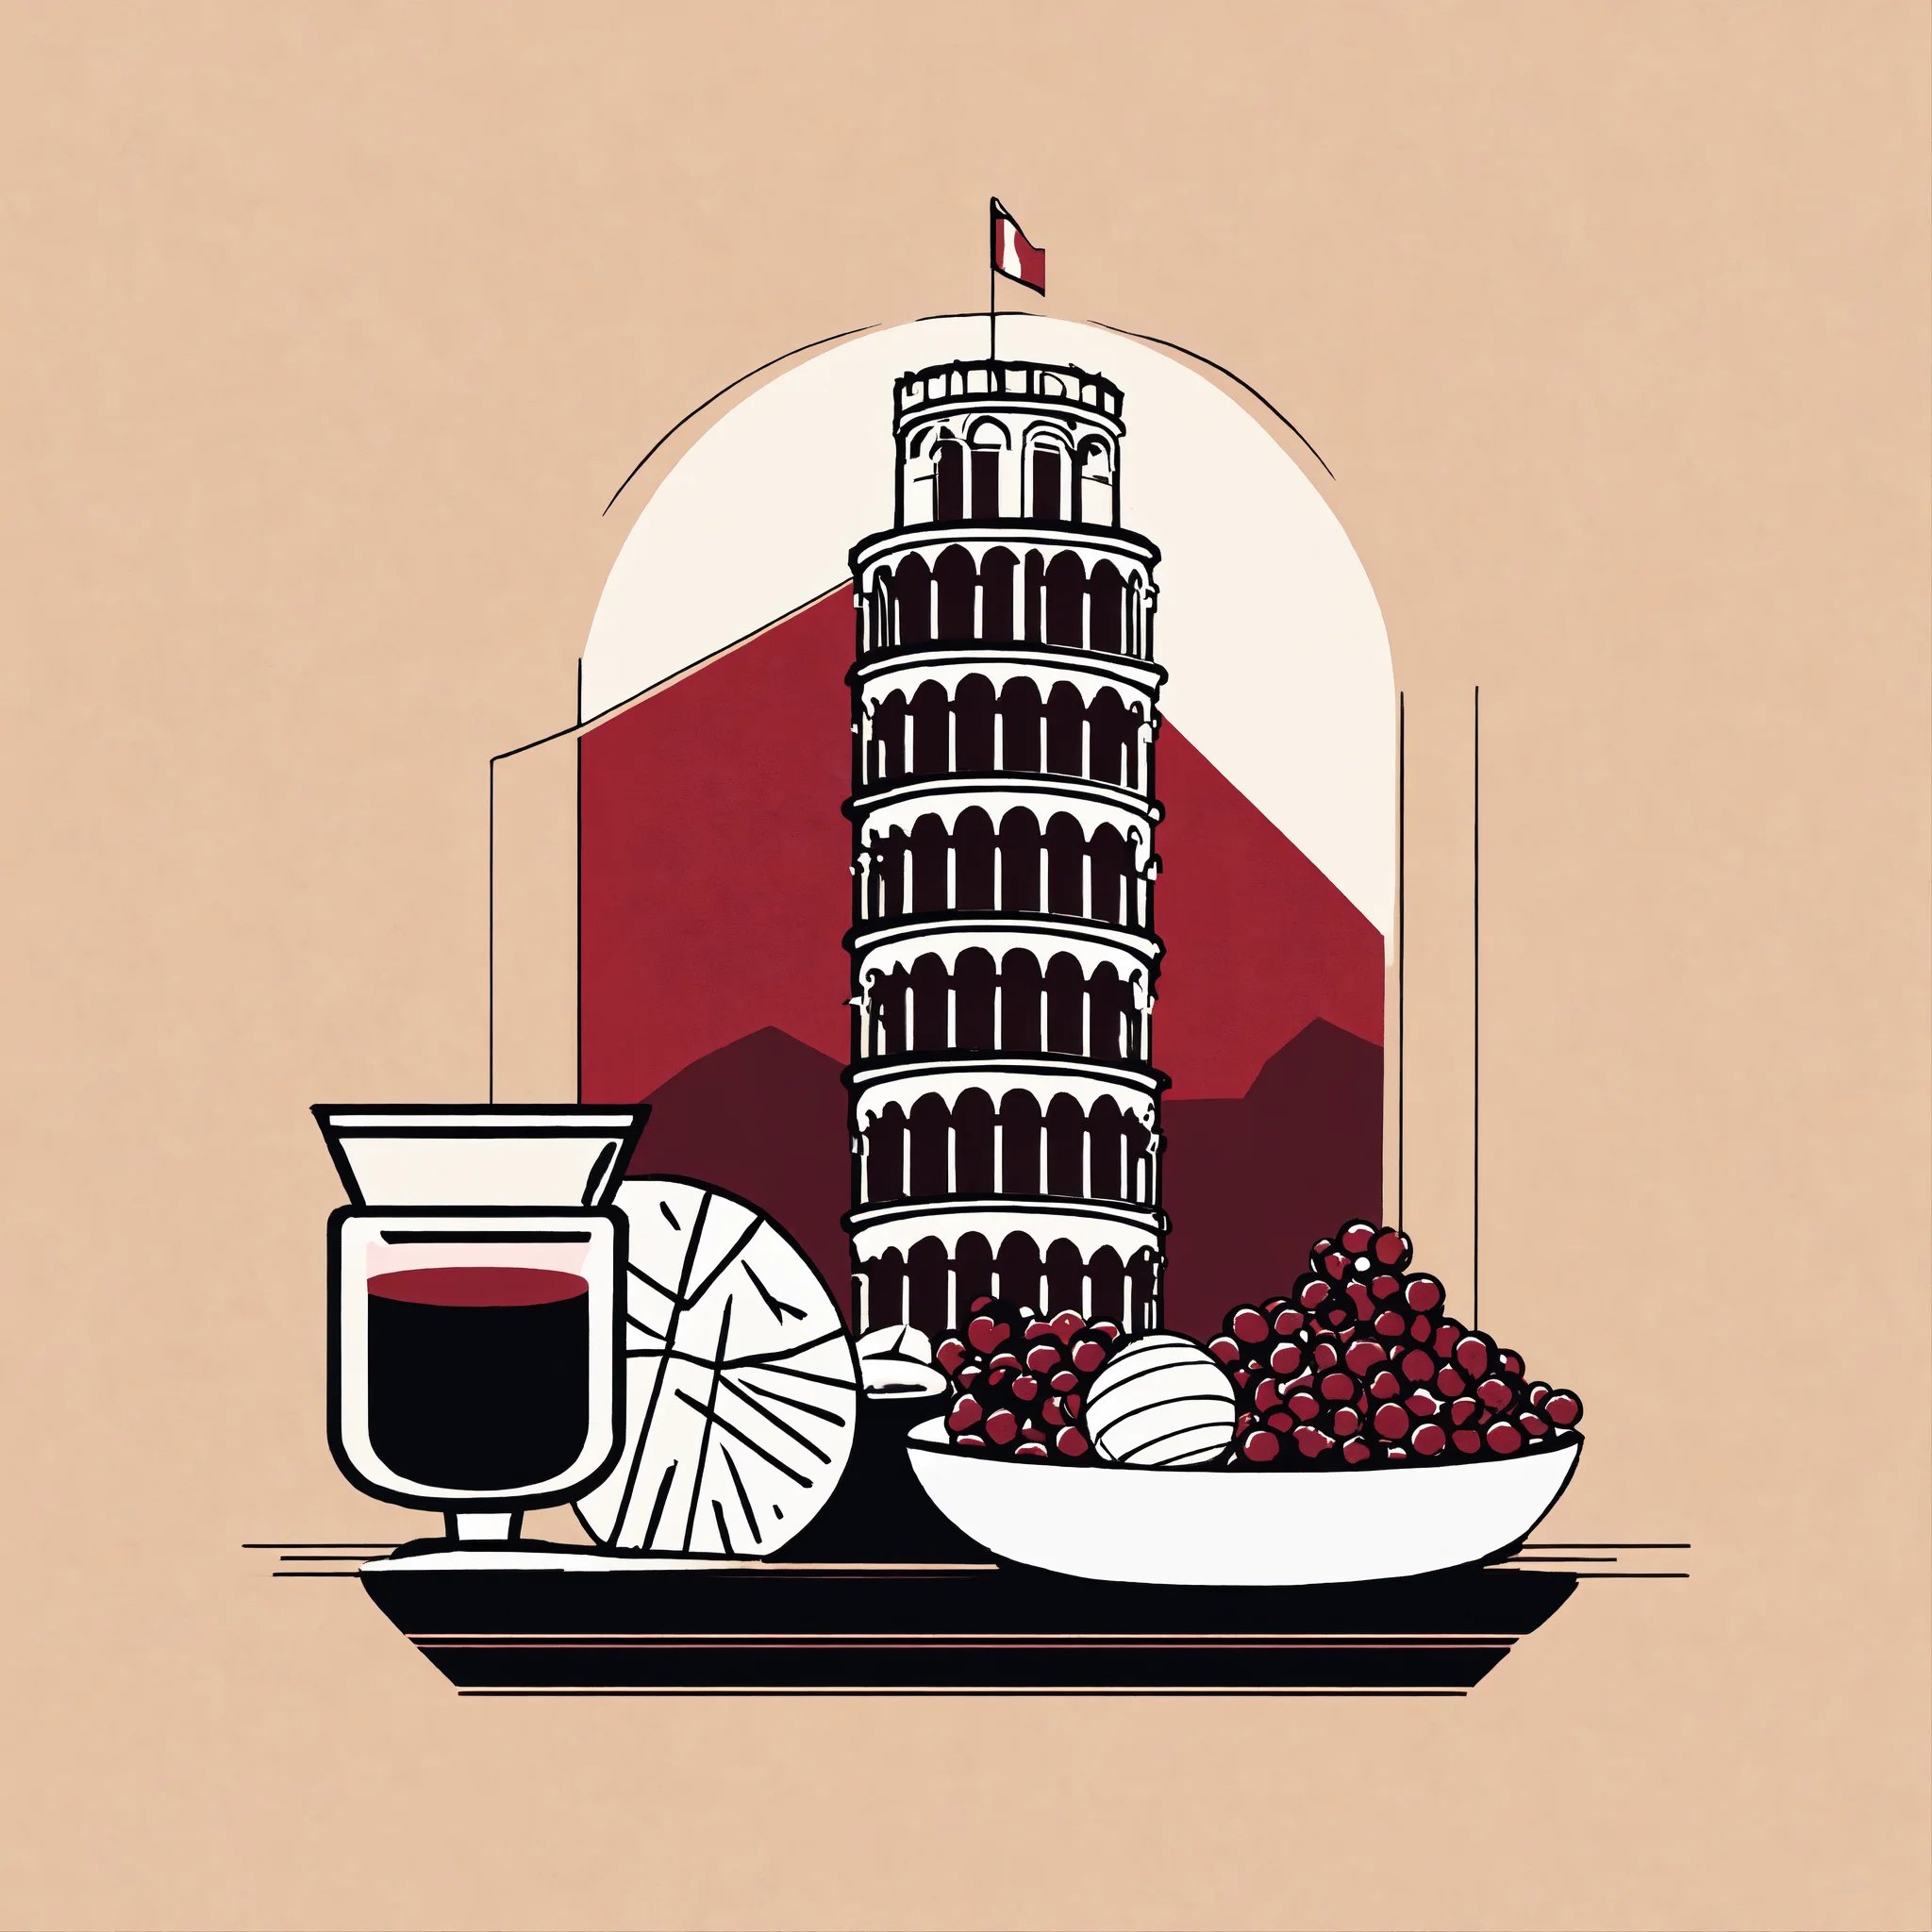 image of pisa tower, with italian elemnts like brean and wine